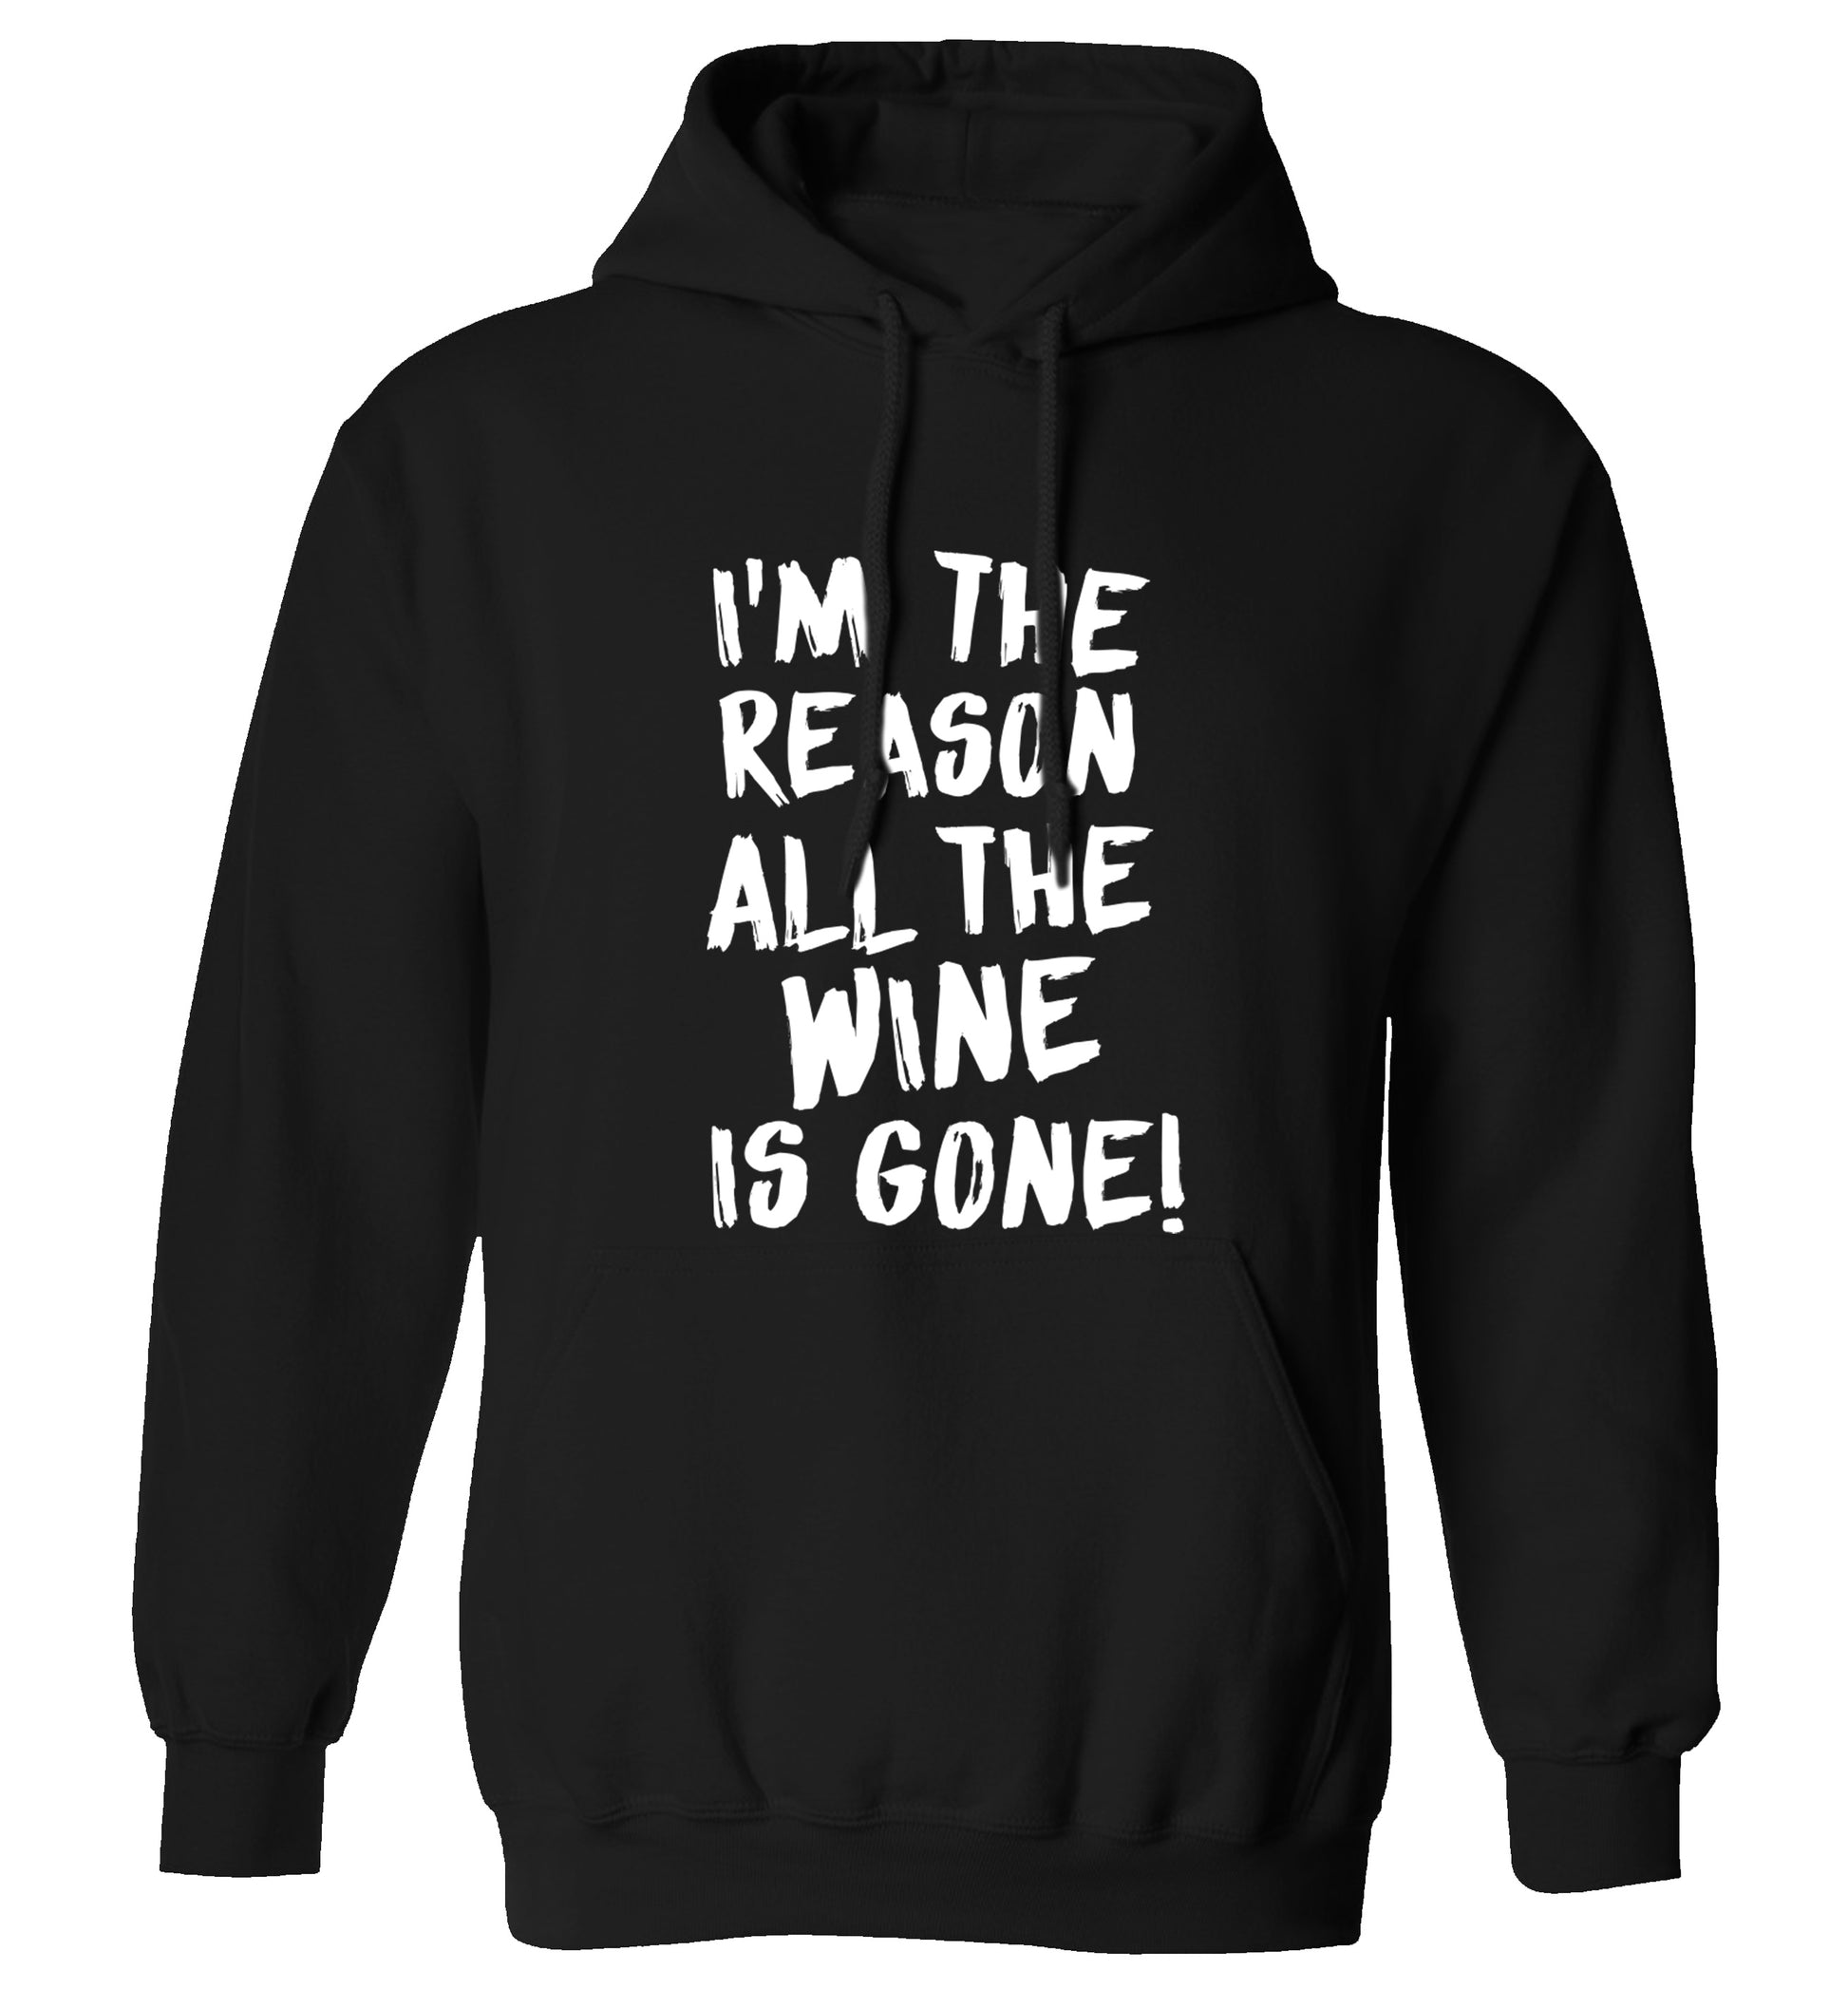 I'm the reason all the wine is gone adults unisex black hoodie 2XL